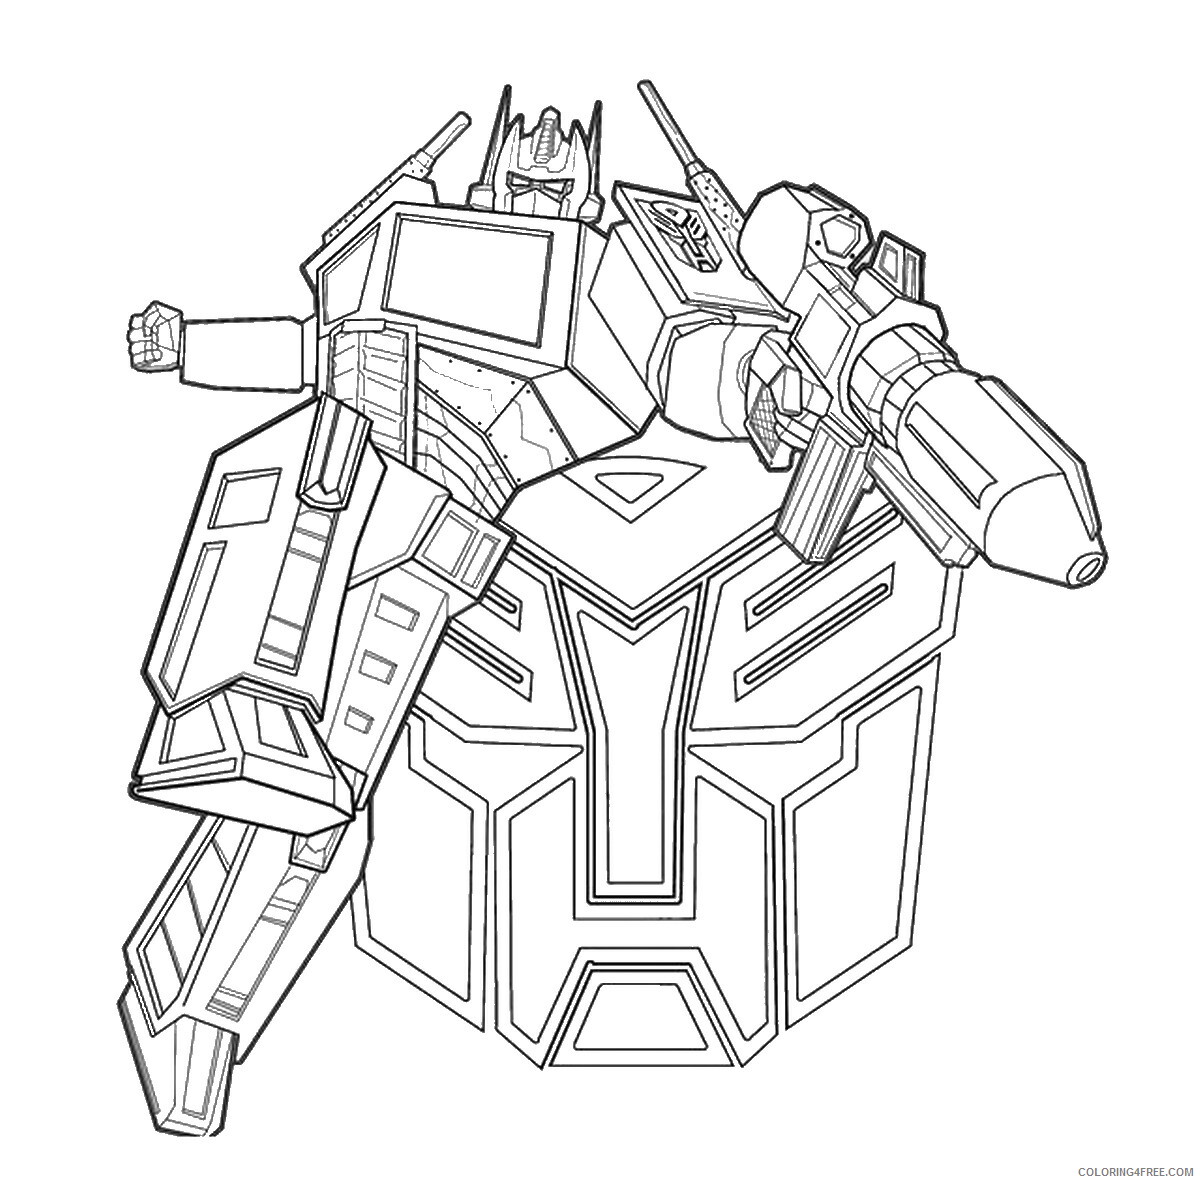 Transformers Coloring Pages TV Film transformers_cl_04 Printable 2020 10590 Coloring4free